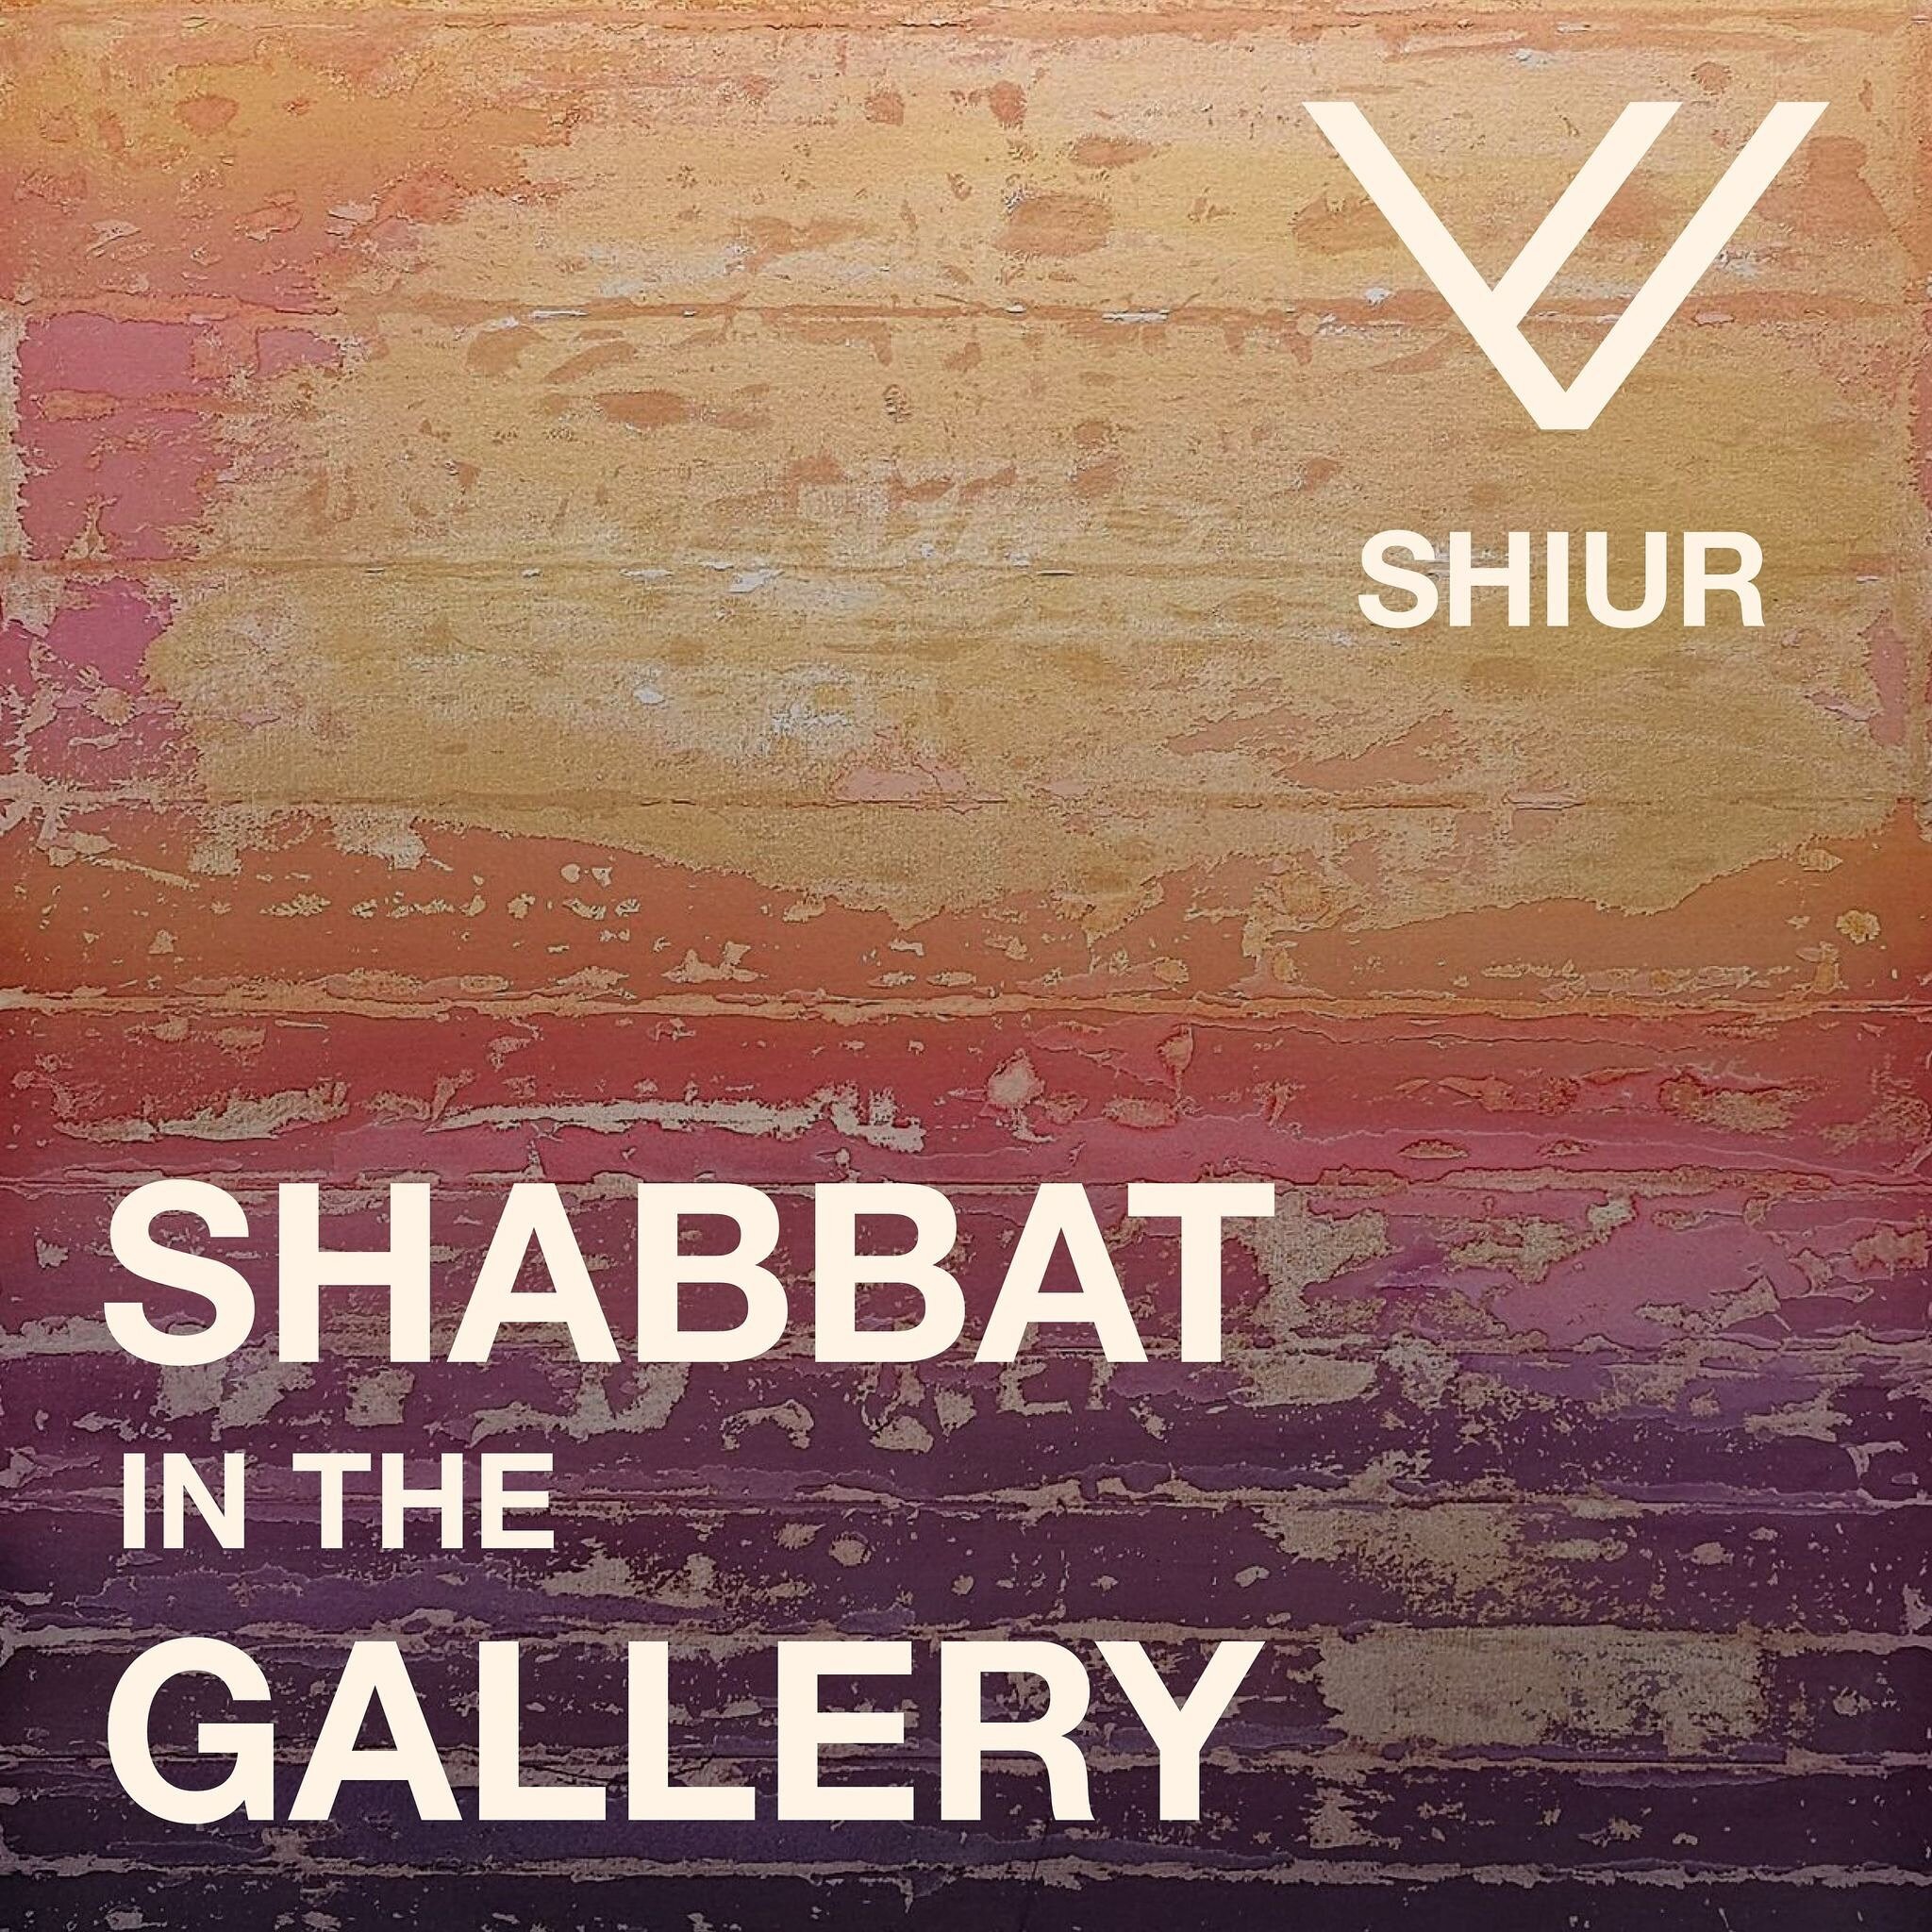 SHIUR is coming to New York on March 15 for SHIUR Shabbat in the Gallery&hellip; registration link in profile 

How can contemporary art reveal new insights into ancient texts and narrative? How can seemingly unrelated texts create a new con-text to 